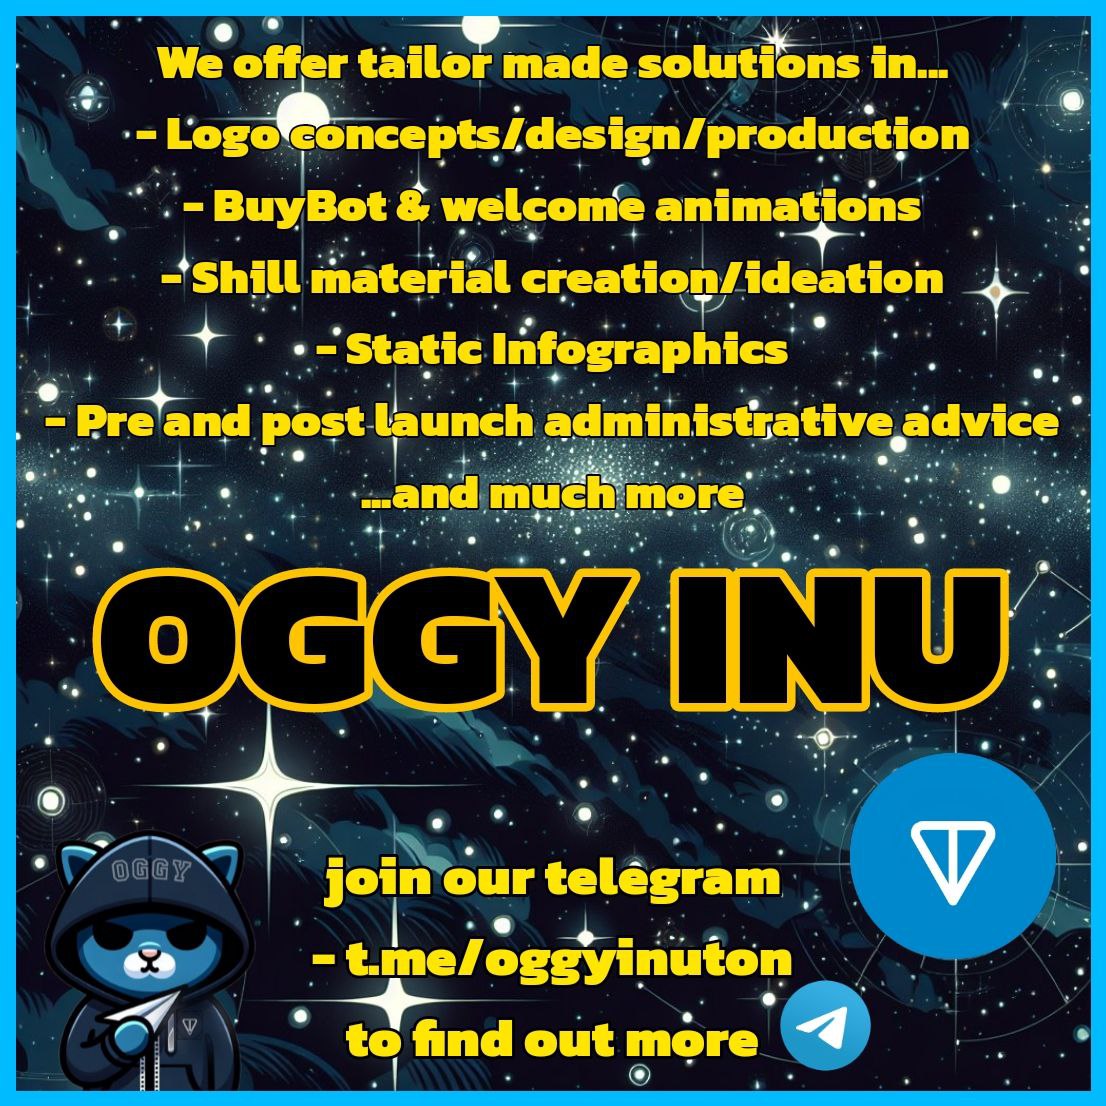 Join our telegram today to lodge your expression of interest, we can start right away!... t.me/oggyinuton

#TON $TON #oggyinuonton